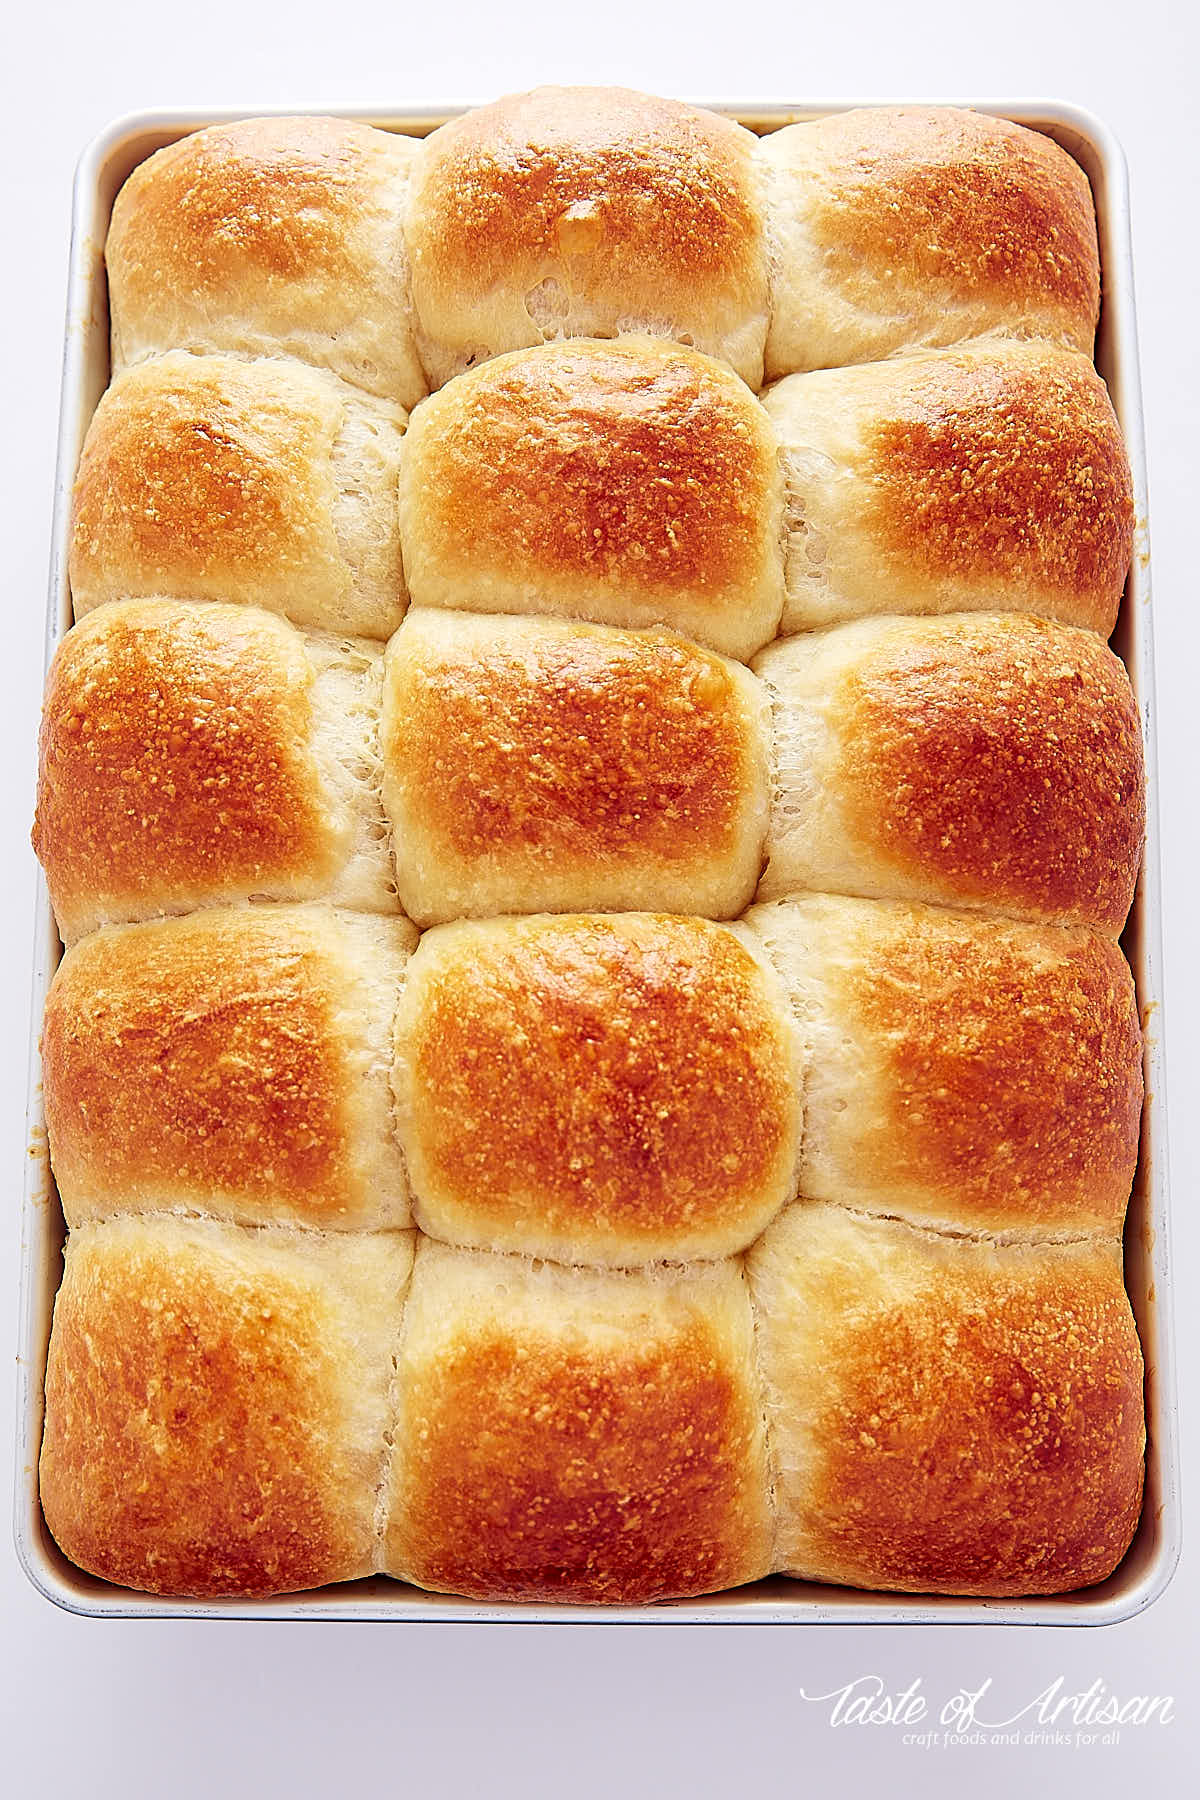 A top down view of a baking pan full of golden brown topped yeast rolls in a baking pan.